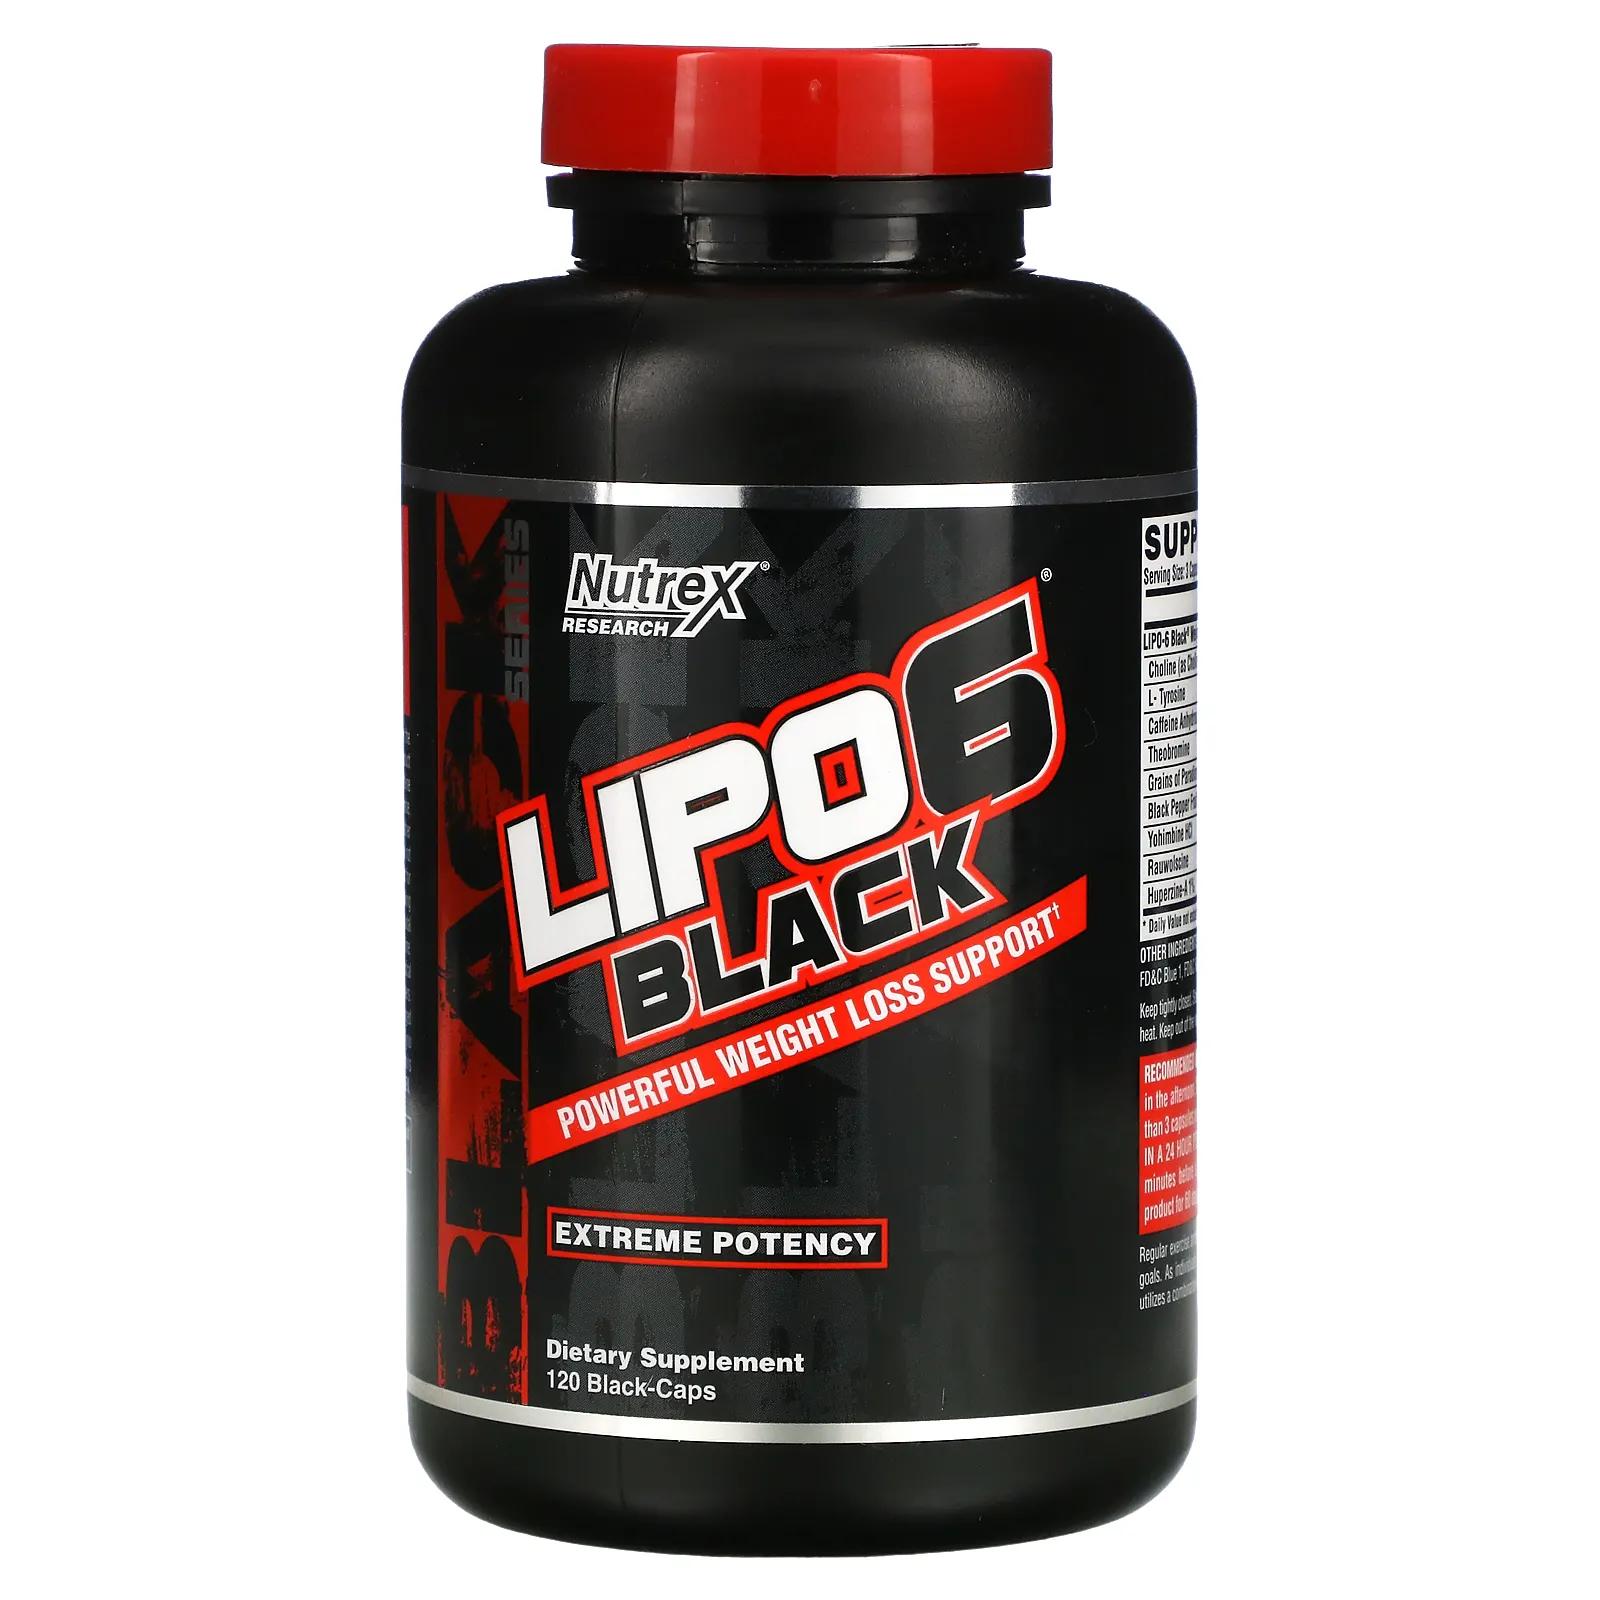 Nutrex Research Lipo-6 Black Extreme Potency 120 капсул nutrex research isofit banana foster 990 г 2 2 фунта